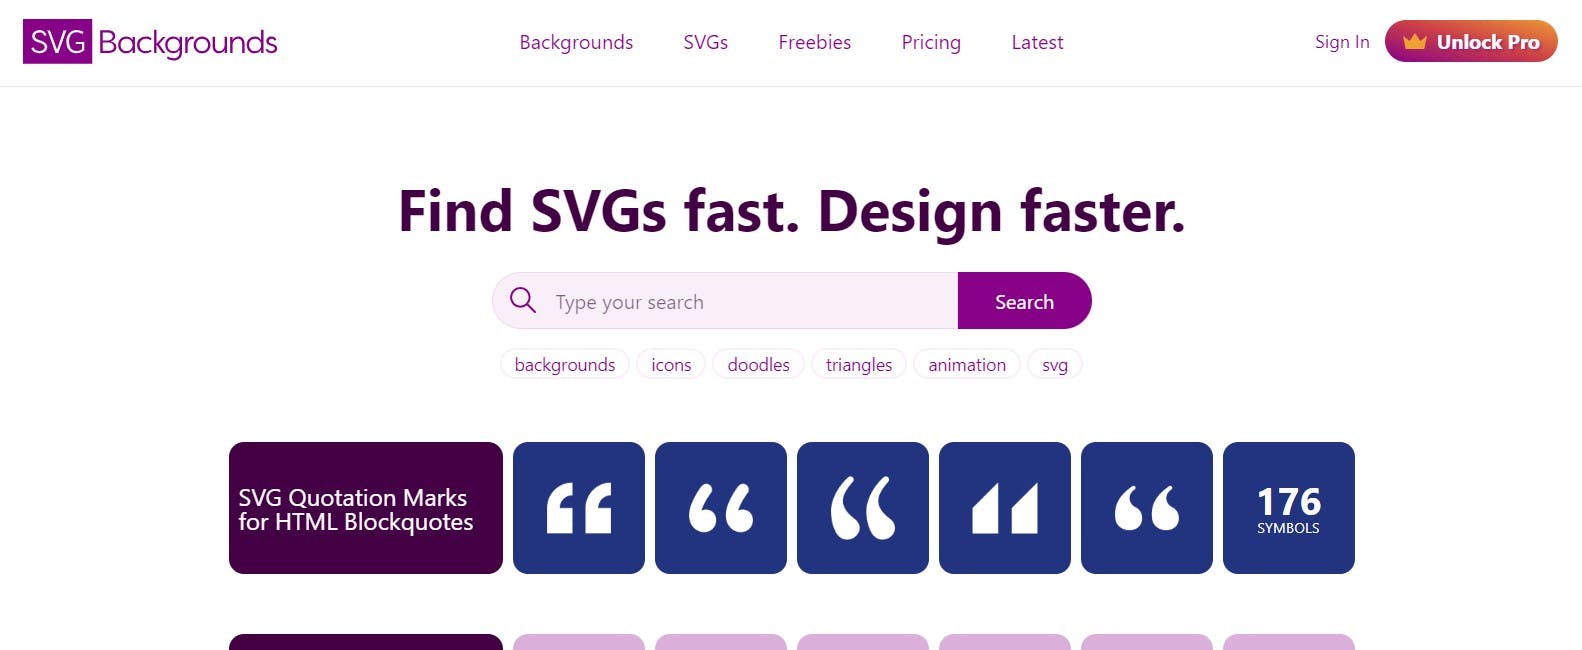 Find SVGs Fast.